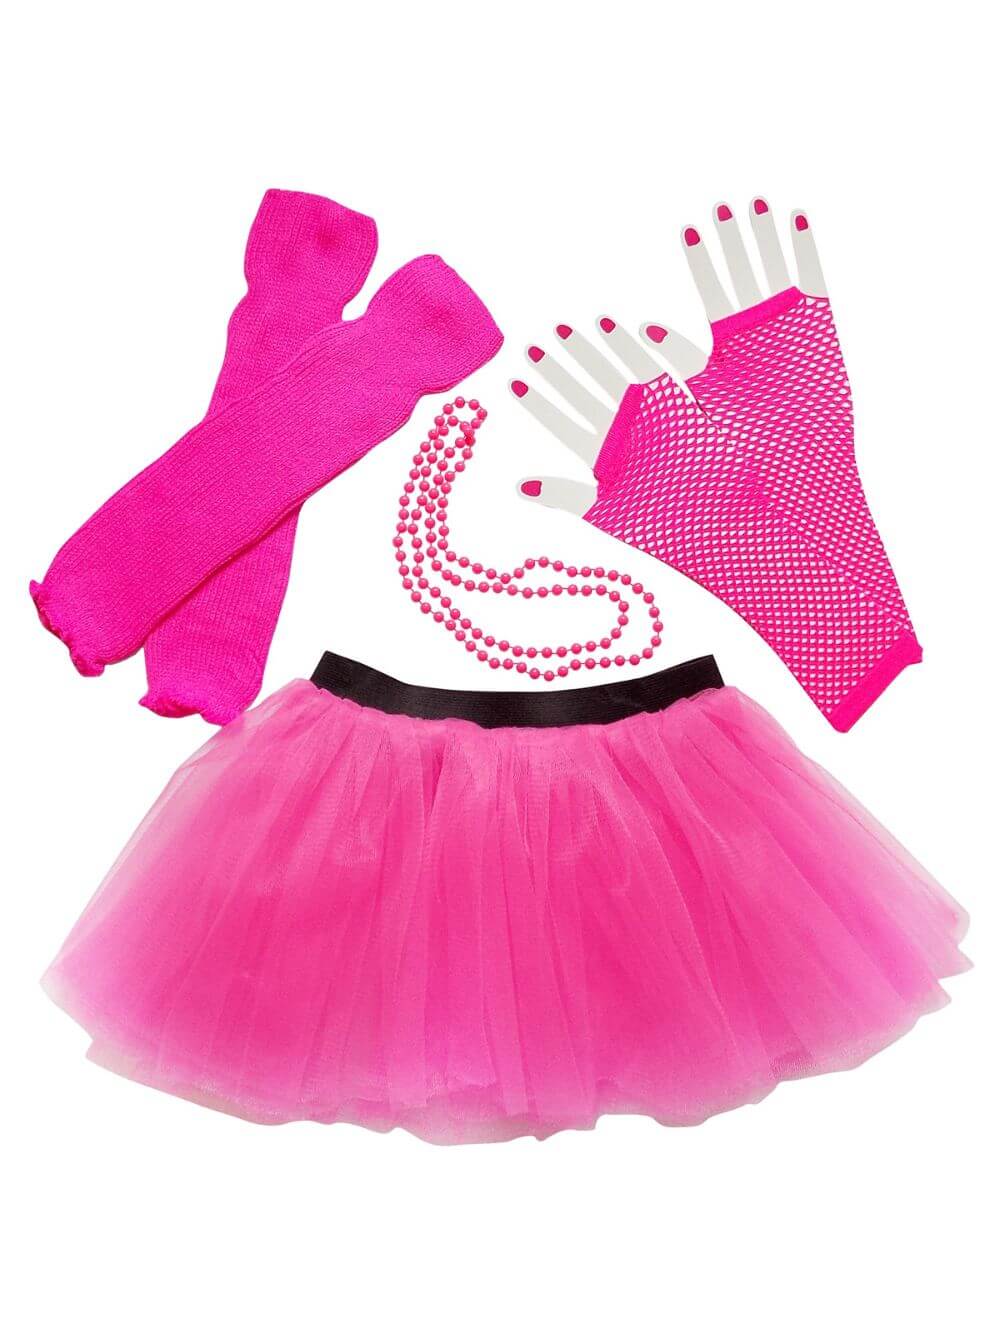 80s Costume for Teens or Women in Neon Hot Pink with Tutu & Accessories - Sydney So Sweet